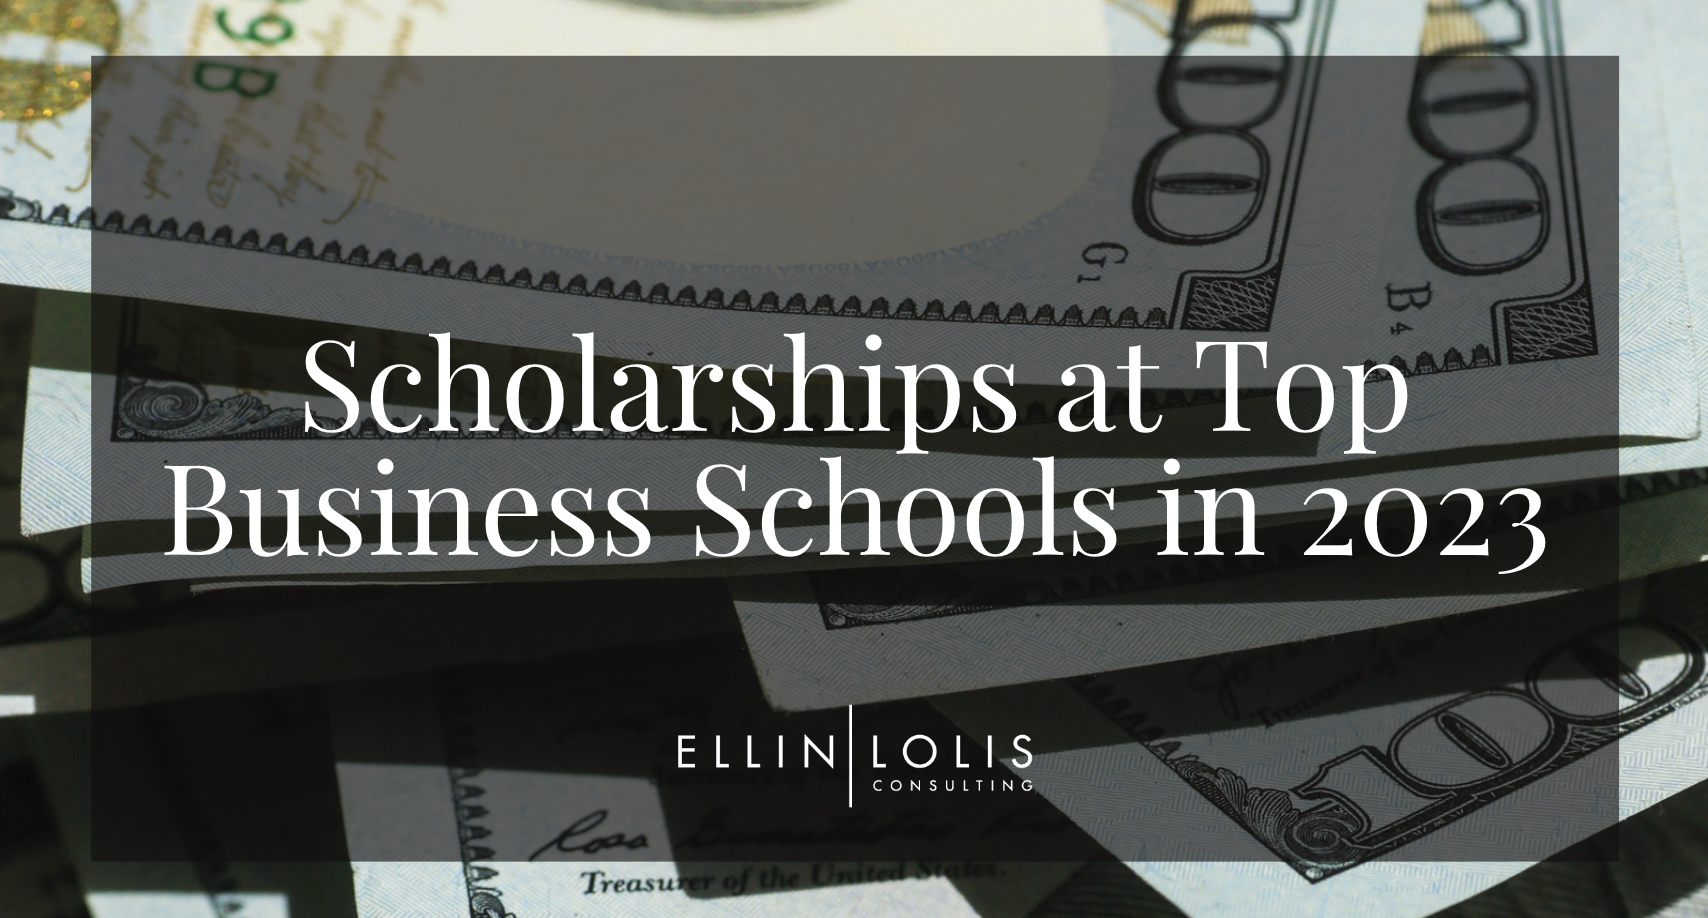 Scholarships at Top Business Schools in 2023